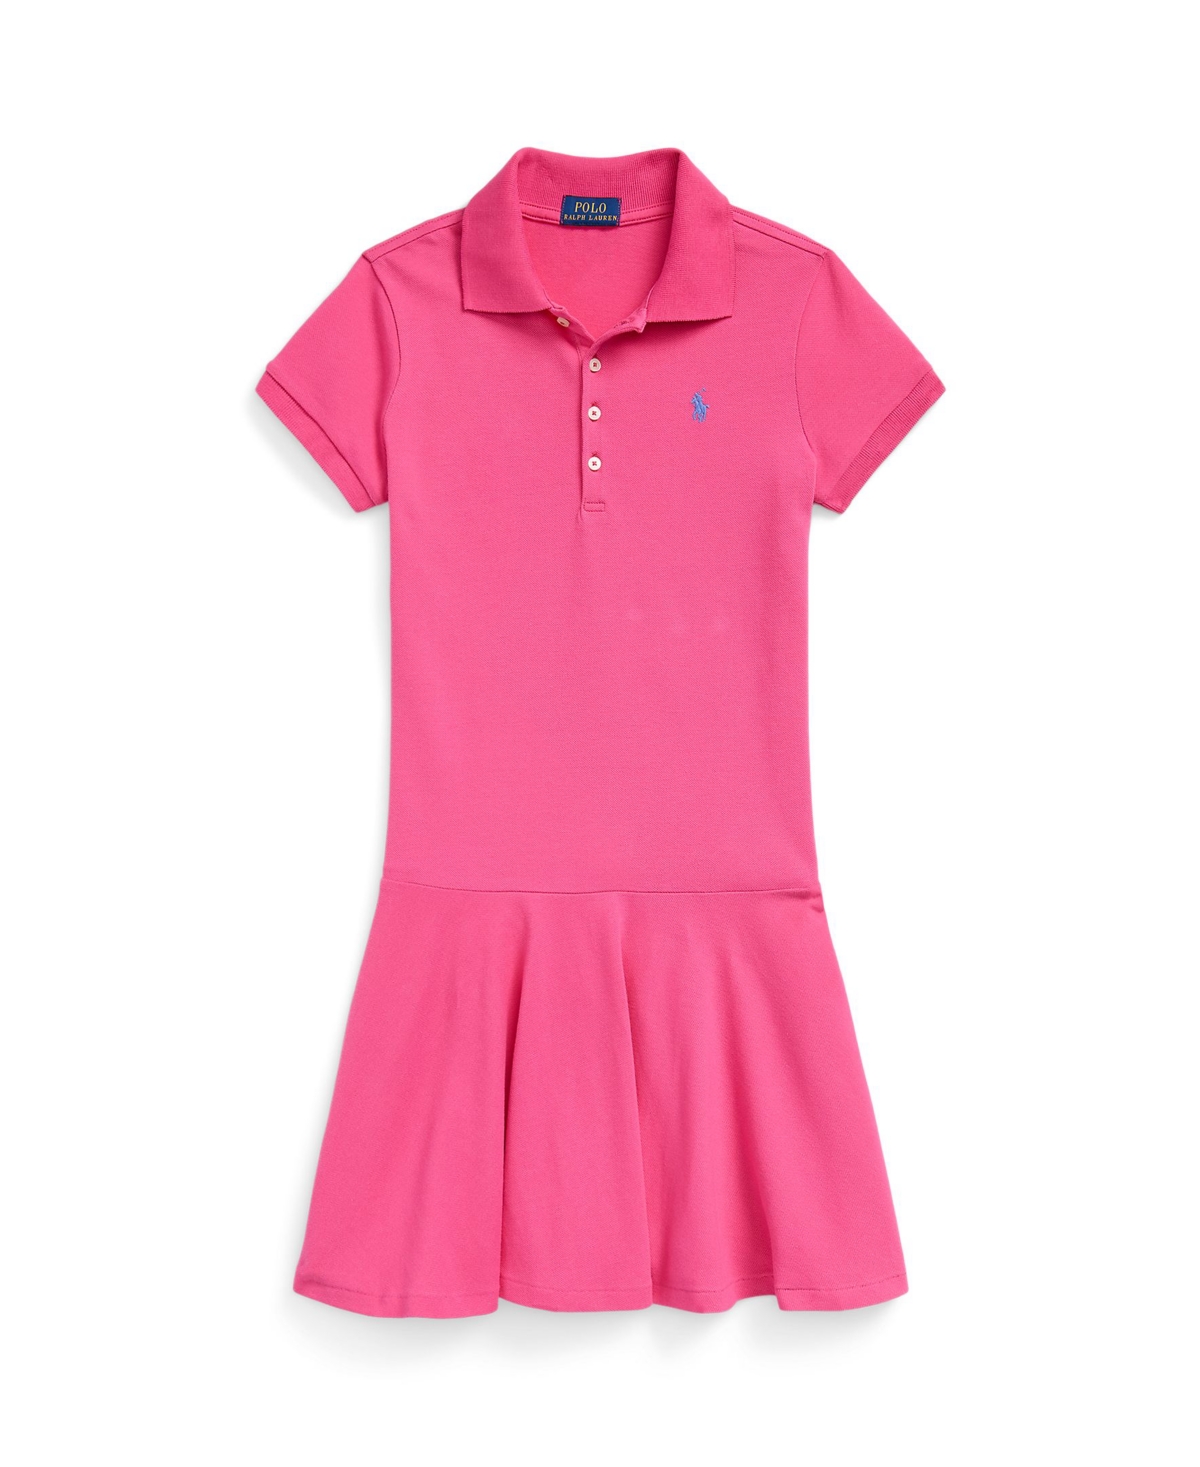 Polo Ralph Lauren Kids' Big Girls Stretch Mesh Polo Dress In Belmont Pink With New England Blue